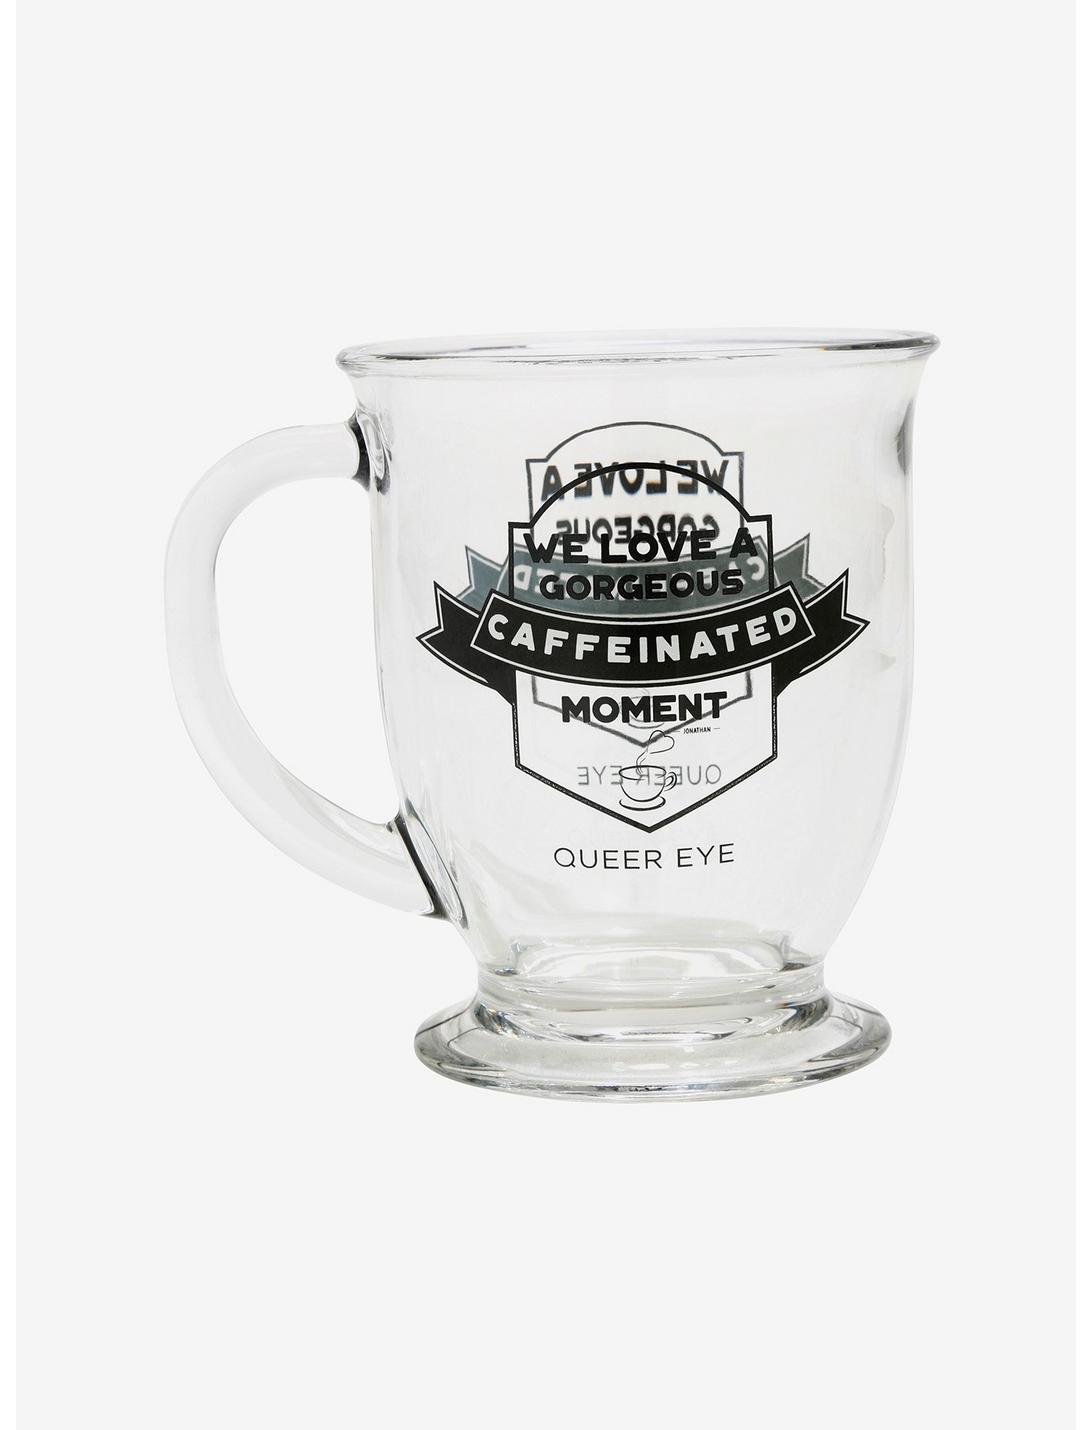 Queer Eye Gorgeous Caffeinated Moment Glass Mug - BoxLunch Exclusive, , hi-res